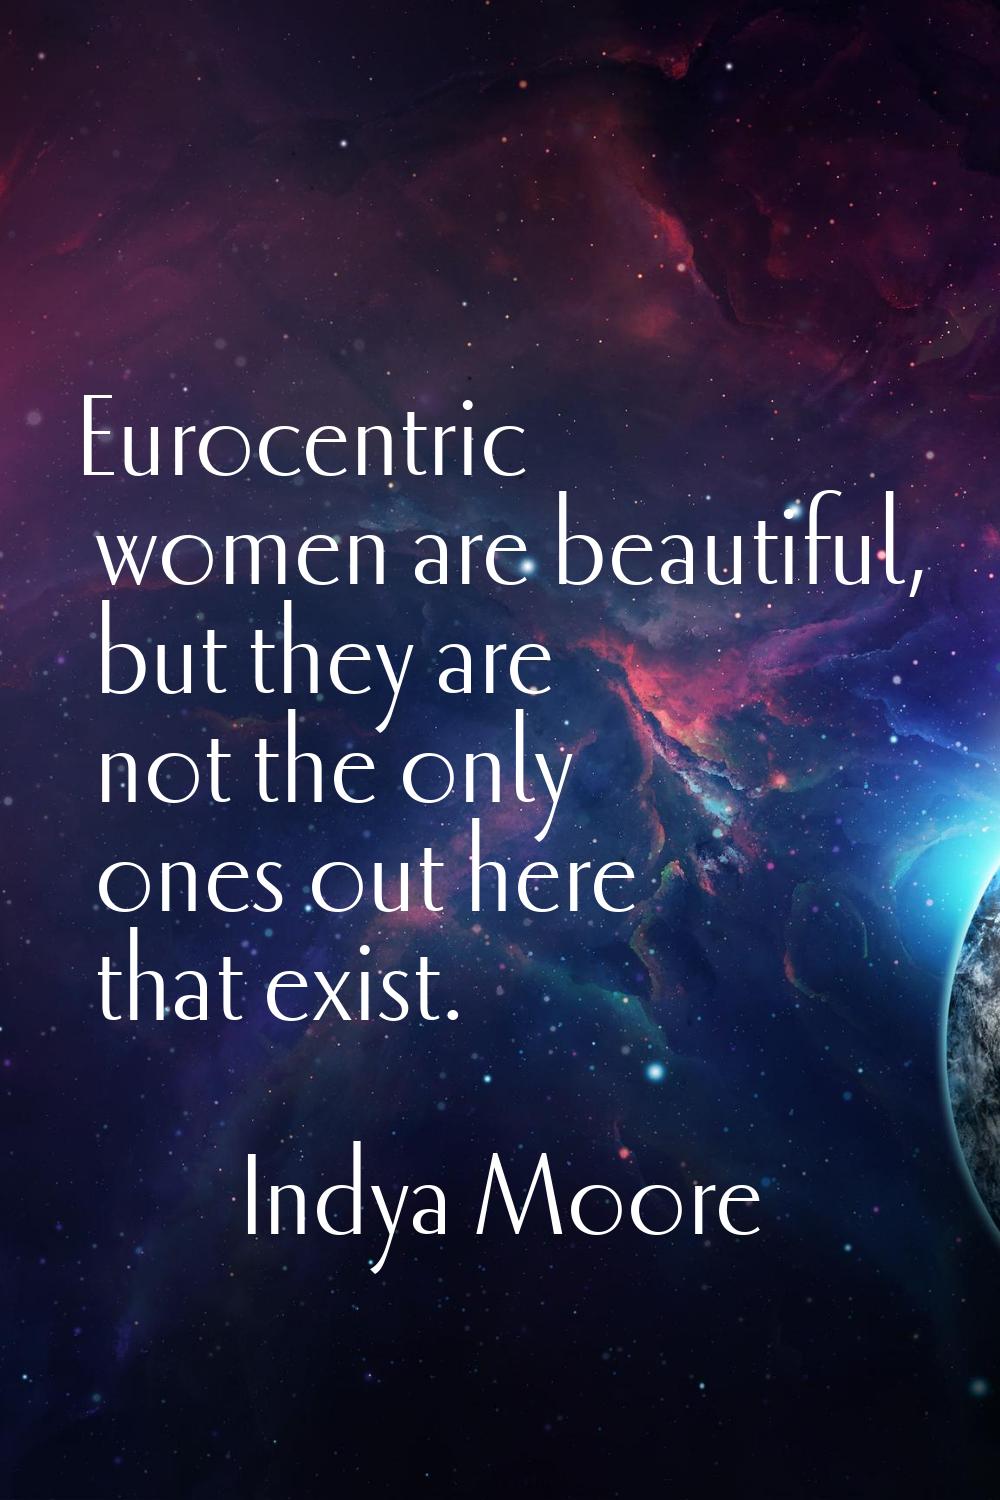 Eurocentric women are beautiful, but they are not the only ones out here that exist.